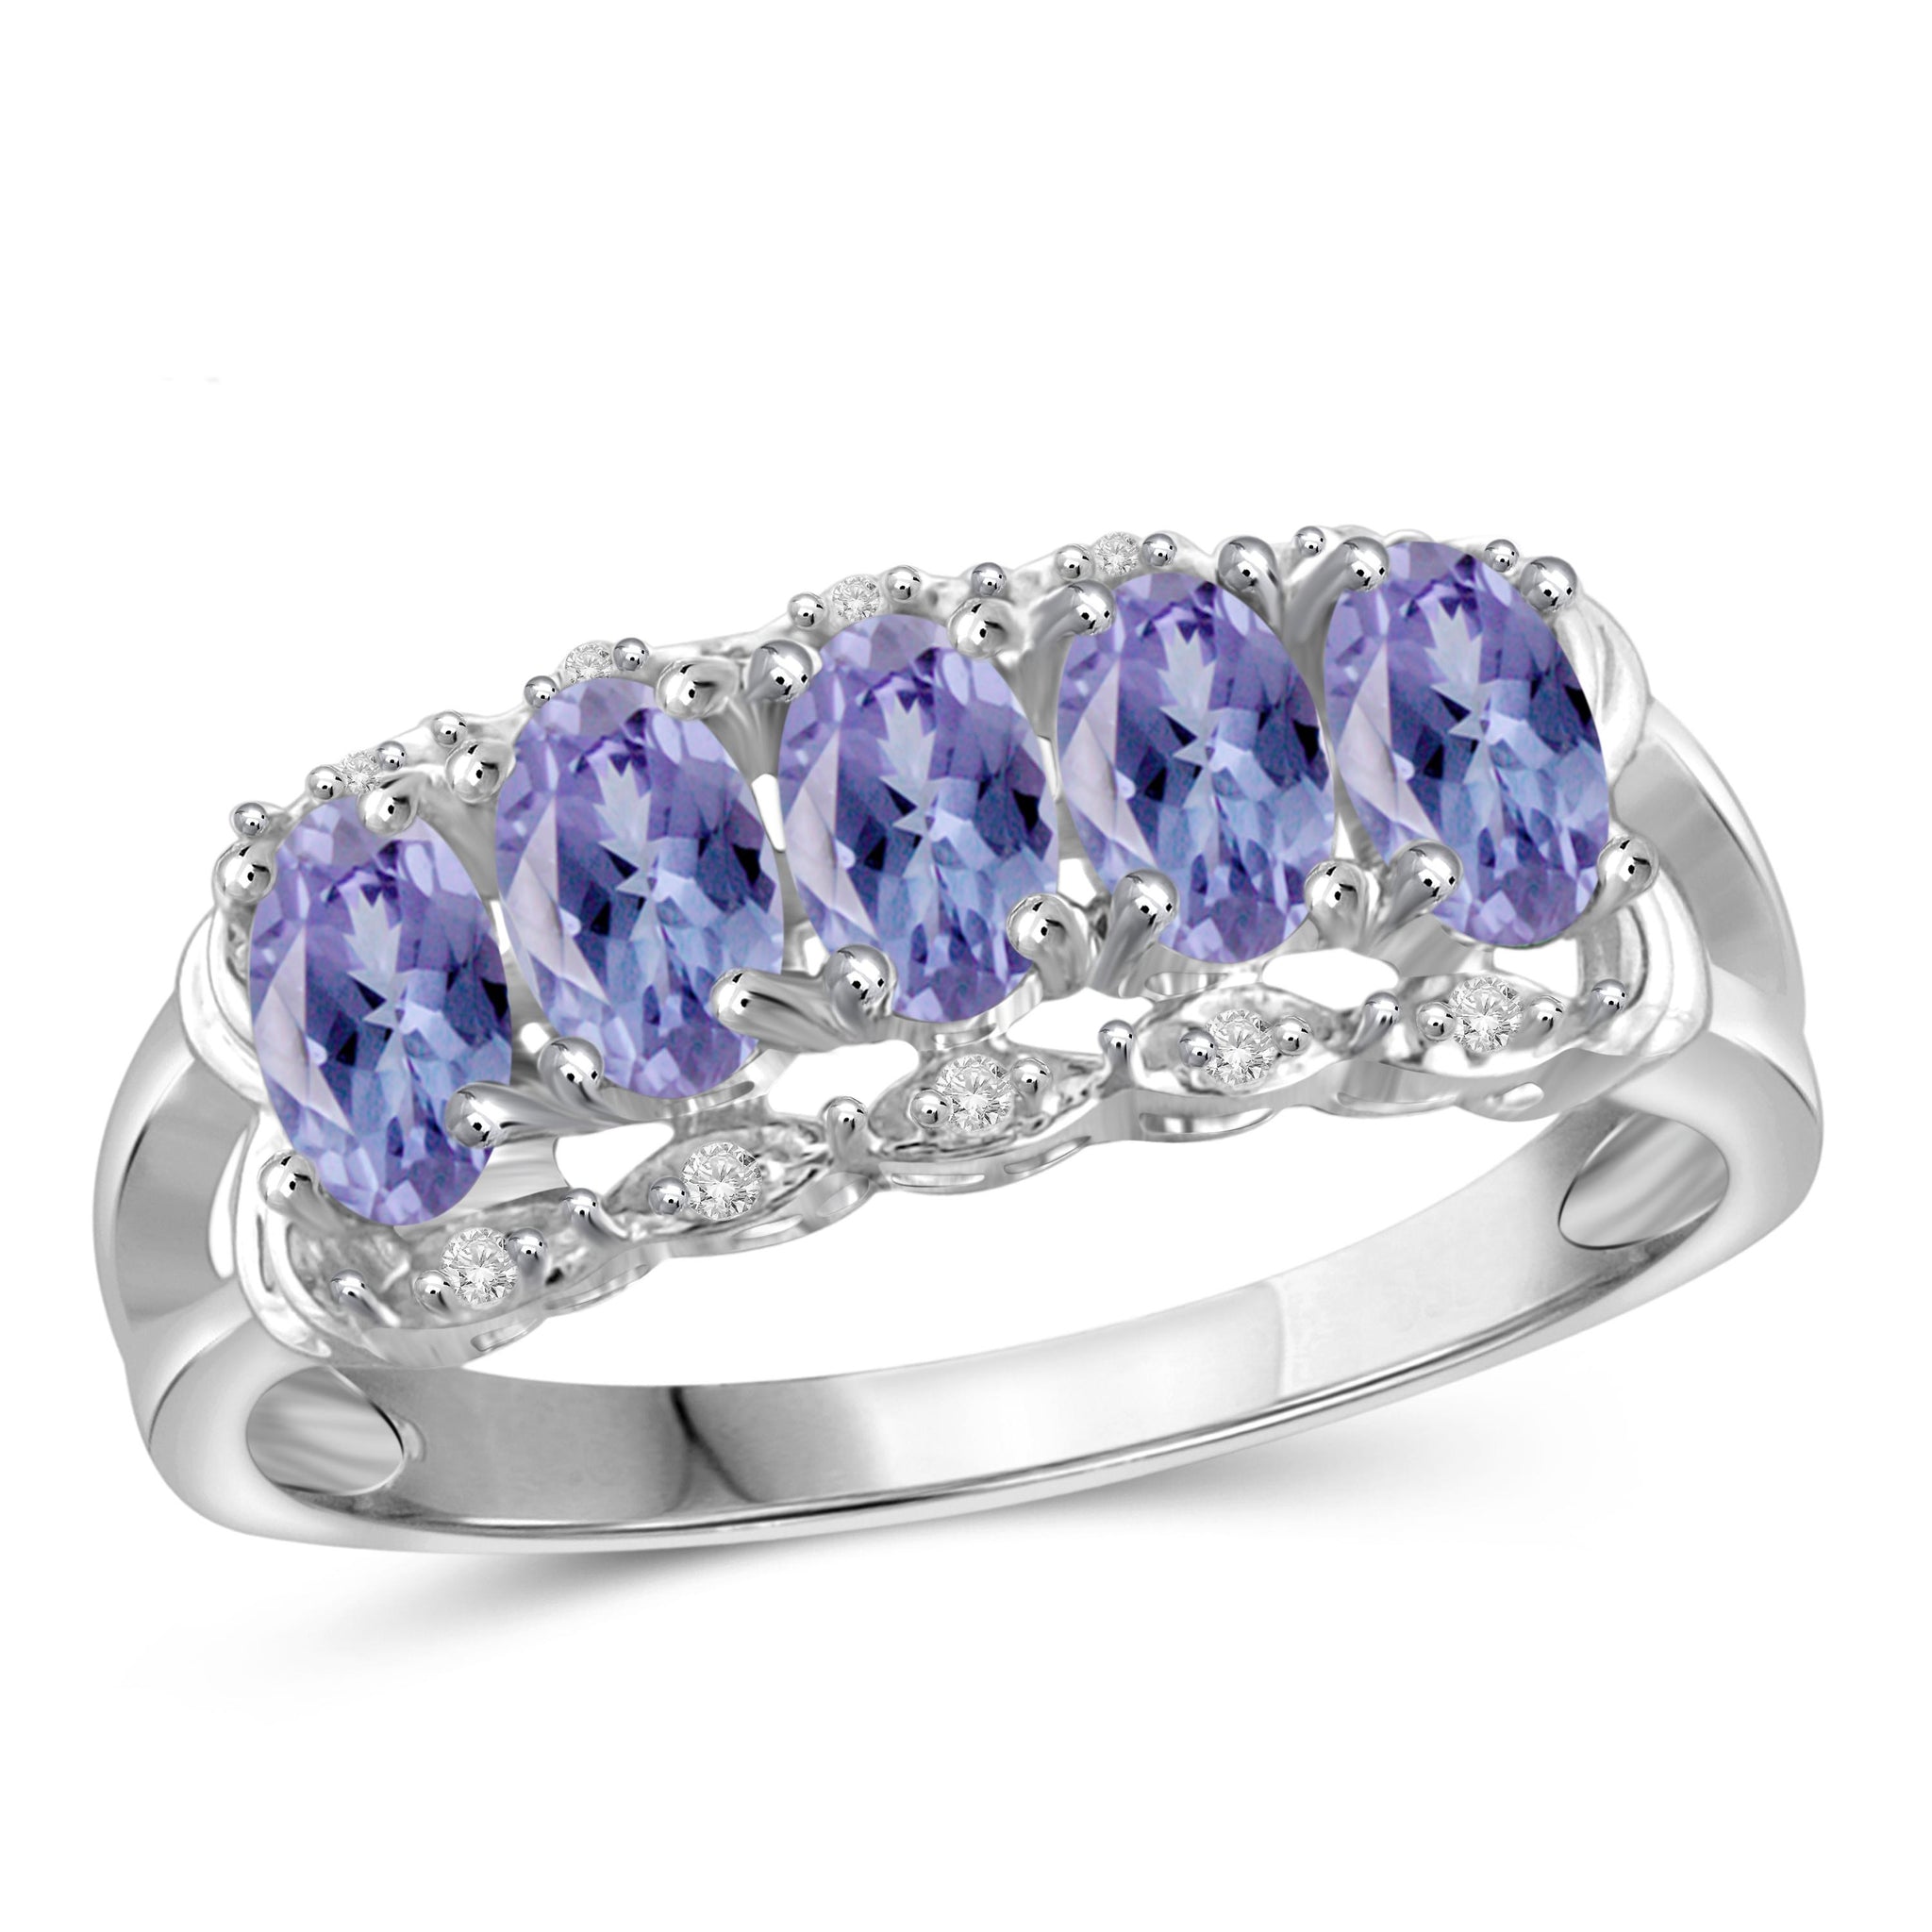 JewelonFire 1.20 Carat T.G.W. Tanzanite and 1/20 ctw White Diamond Sterling Silver Ring - Assorted Colors